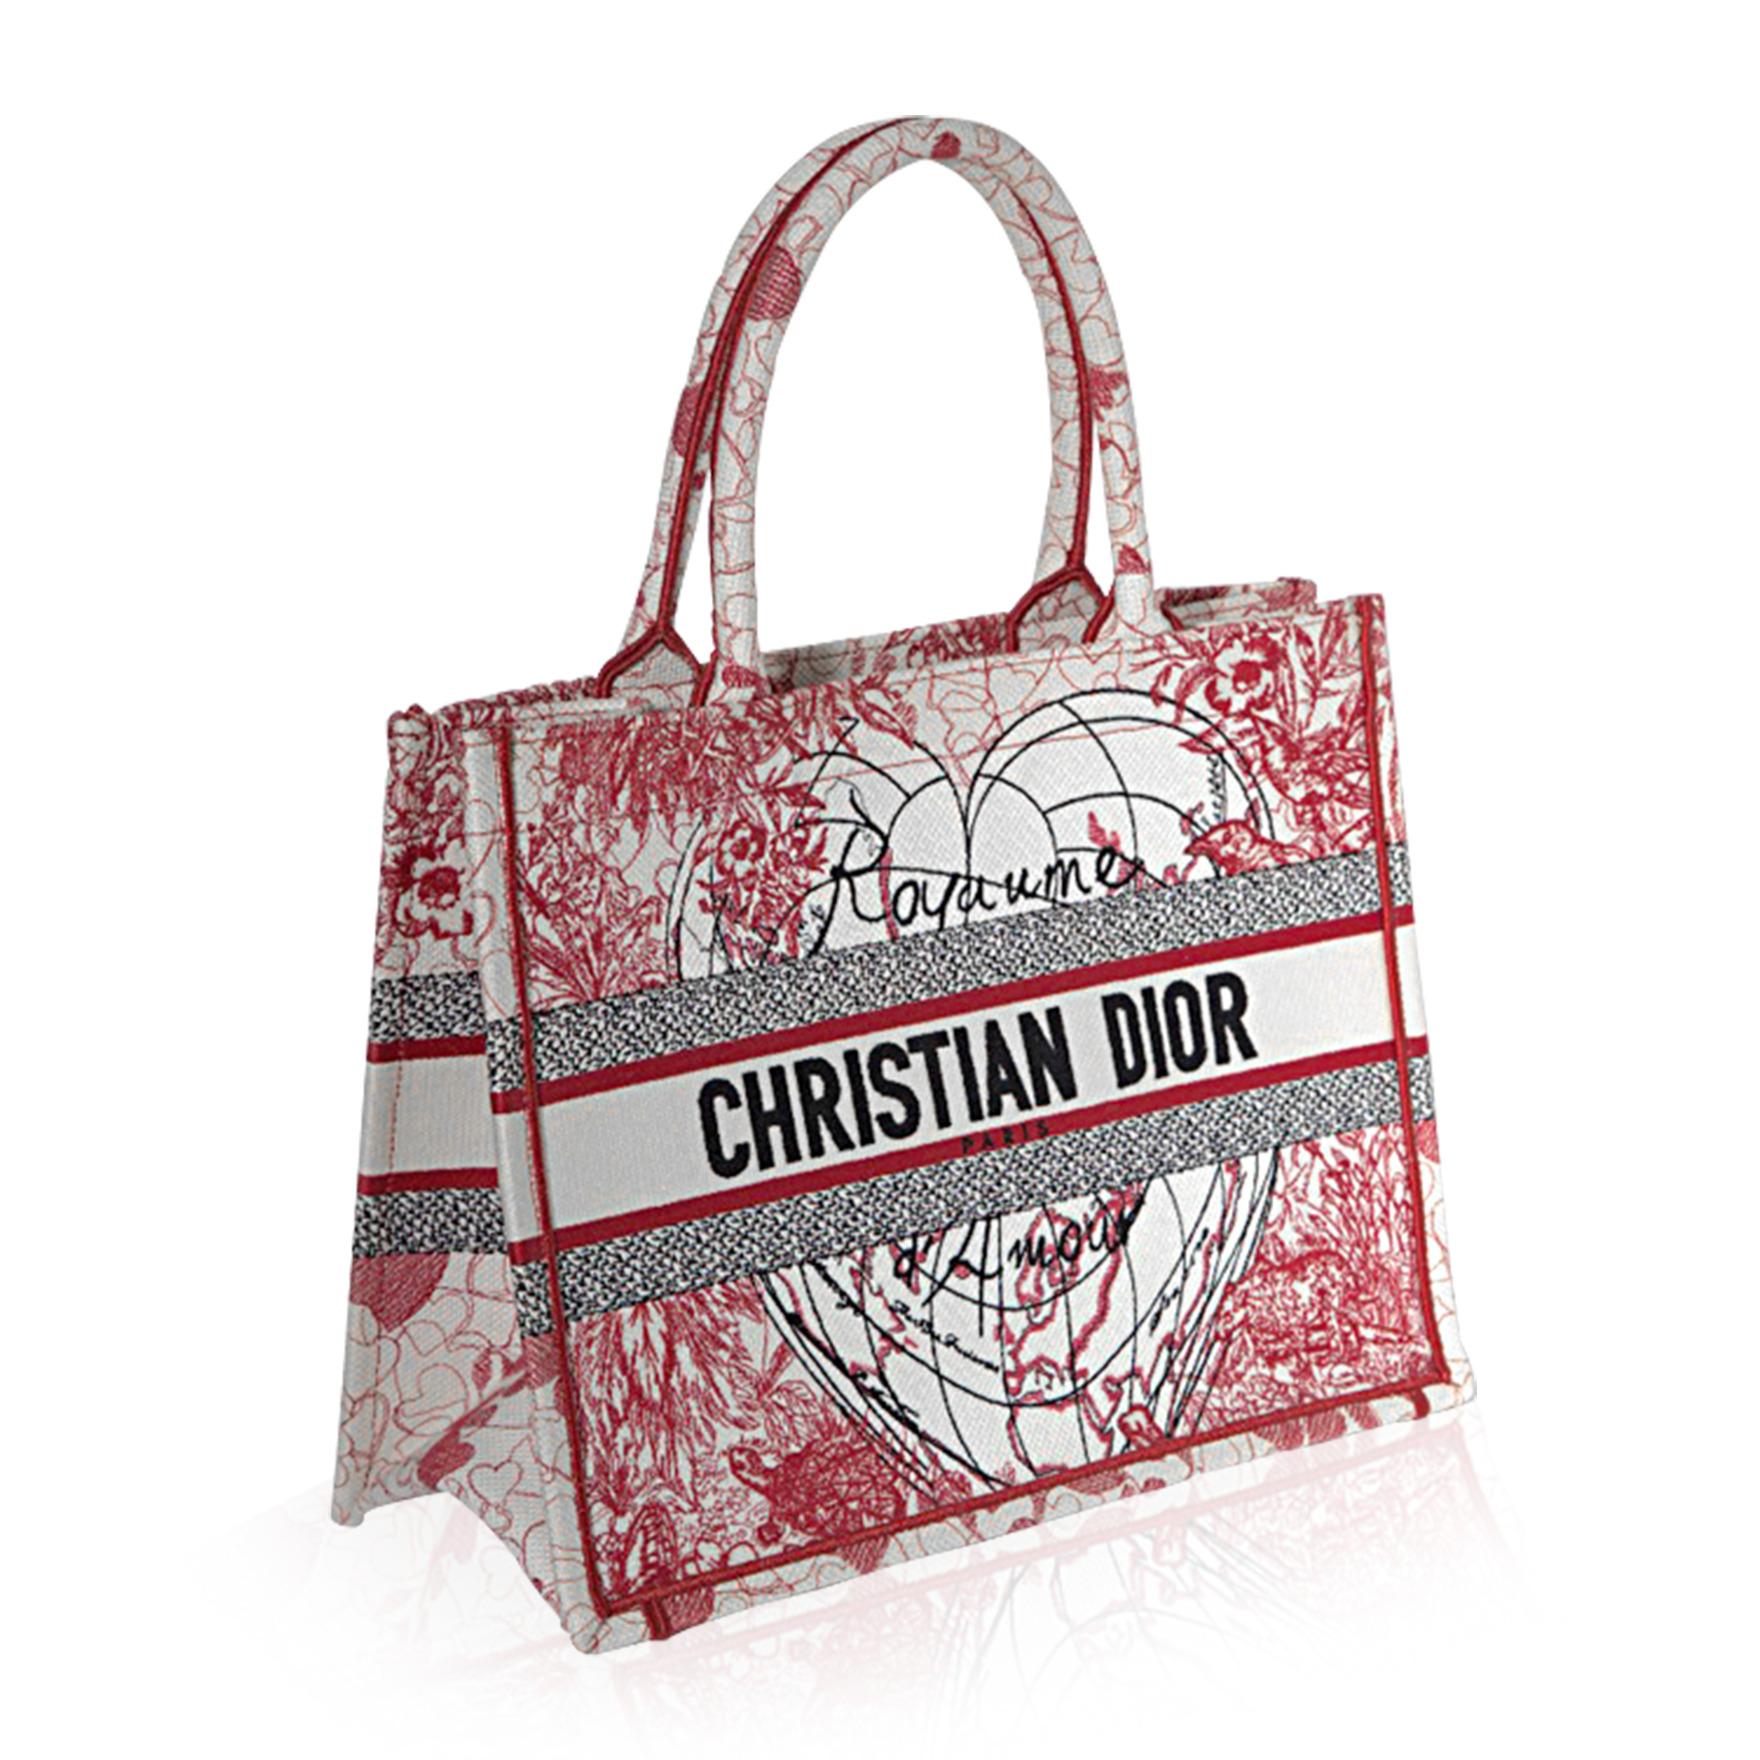 Created by Maria Grazia Chiuri, the Creative Director of Christian Dior, the Dior Book Tote is a key element of the Dior aesthetic.

The Christian Dior D-Royaume d’Amour Canvas Book Bag, from the Dioramour collection 2021, exudes a strong feeling of